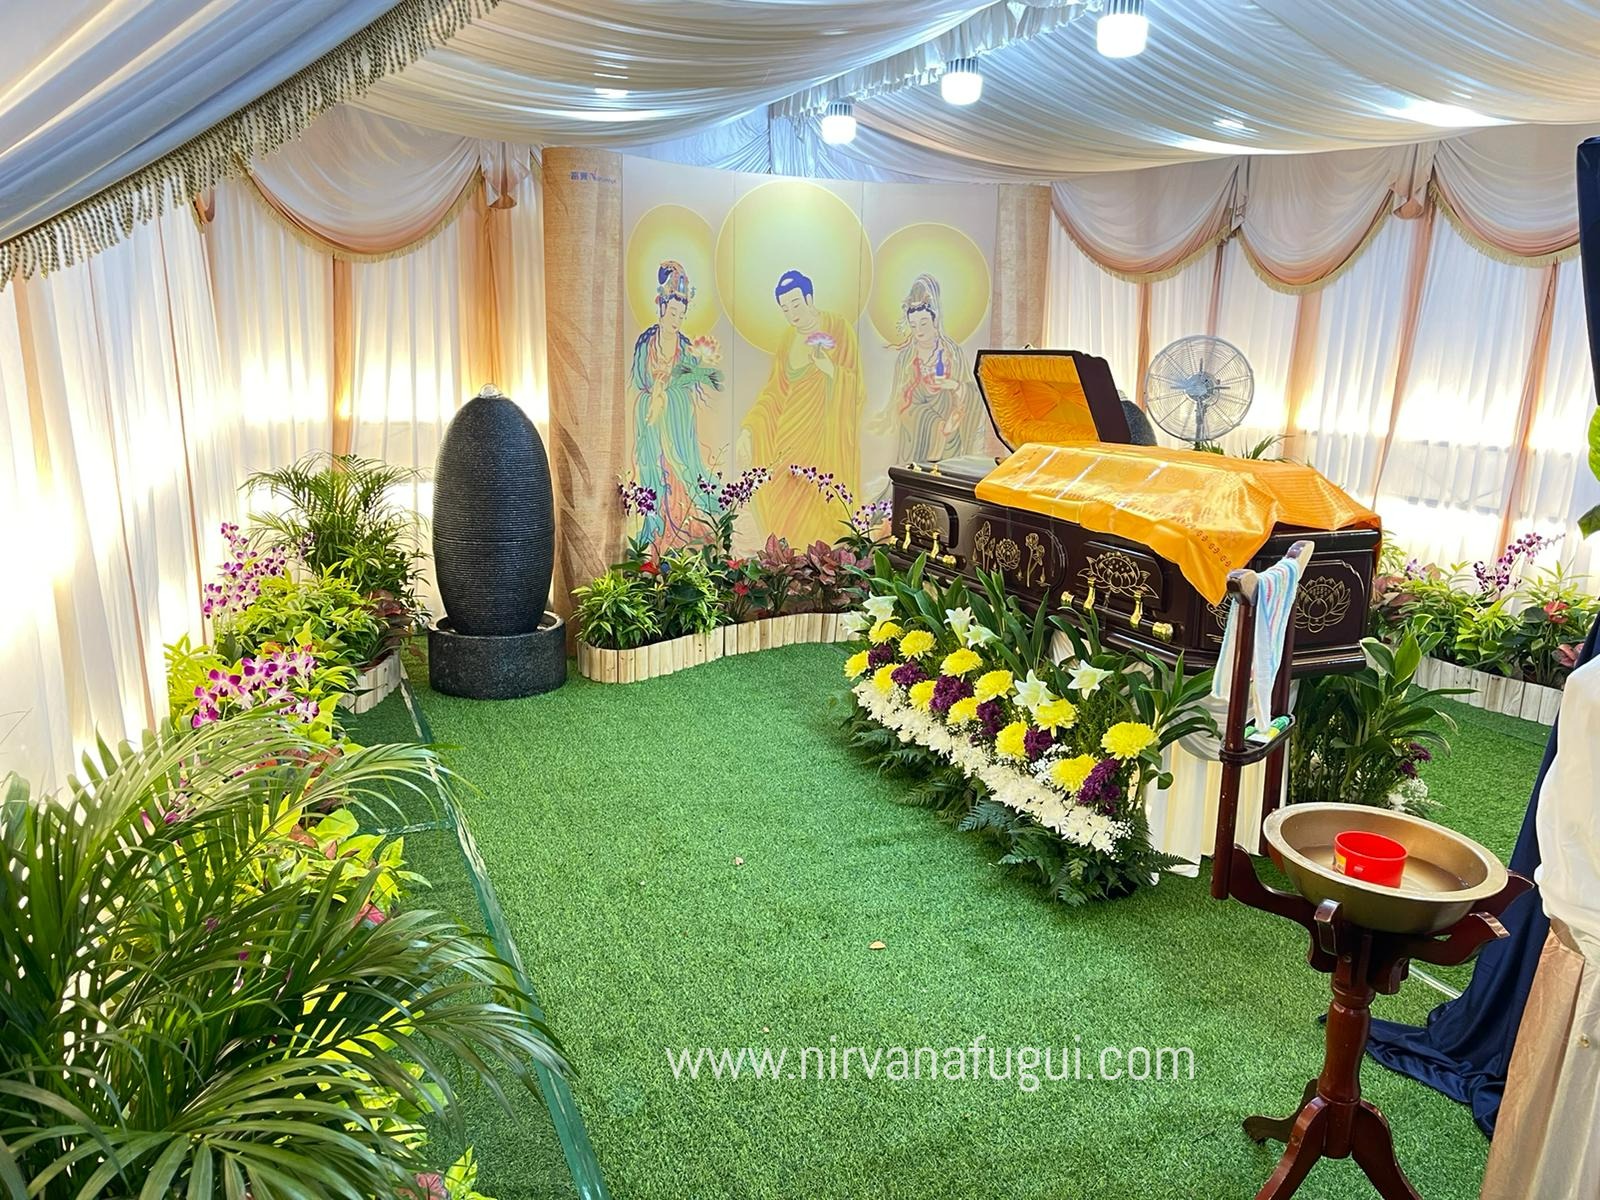 A quality Buddhist funeral in Singapore organised by Nirvana Singapore